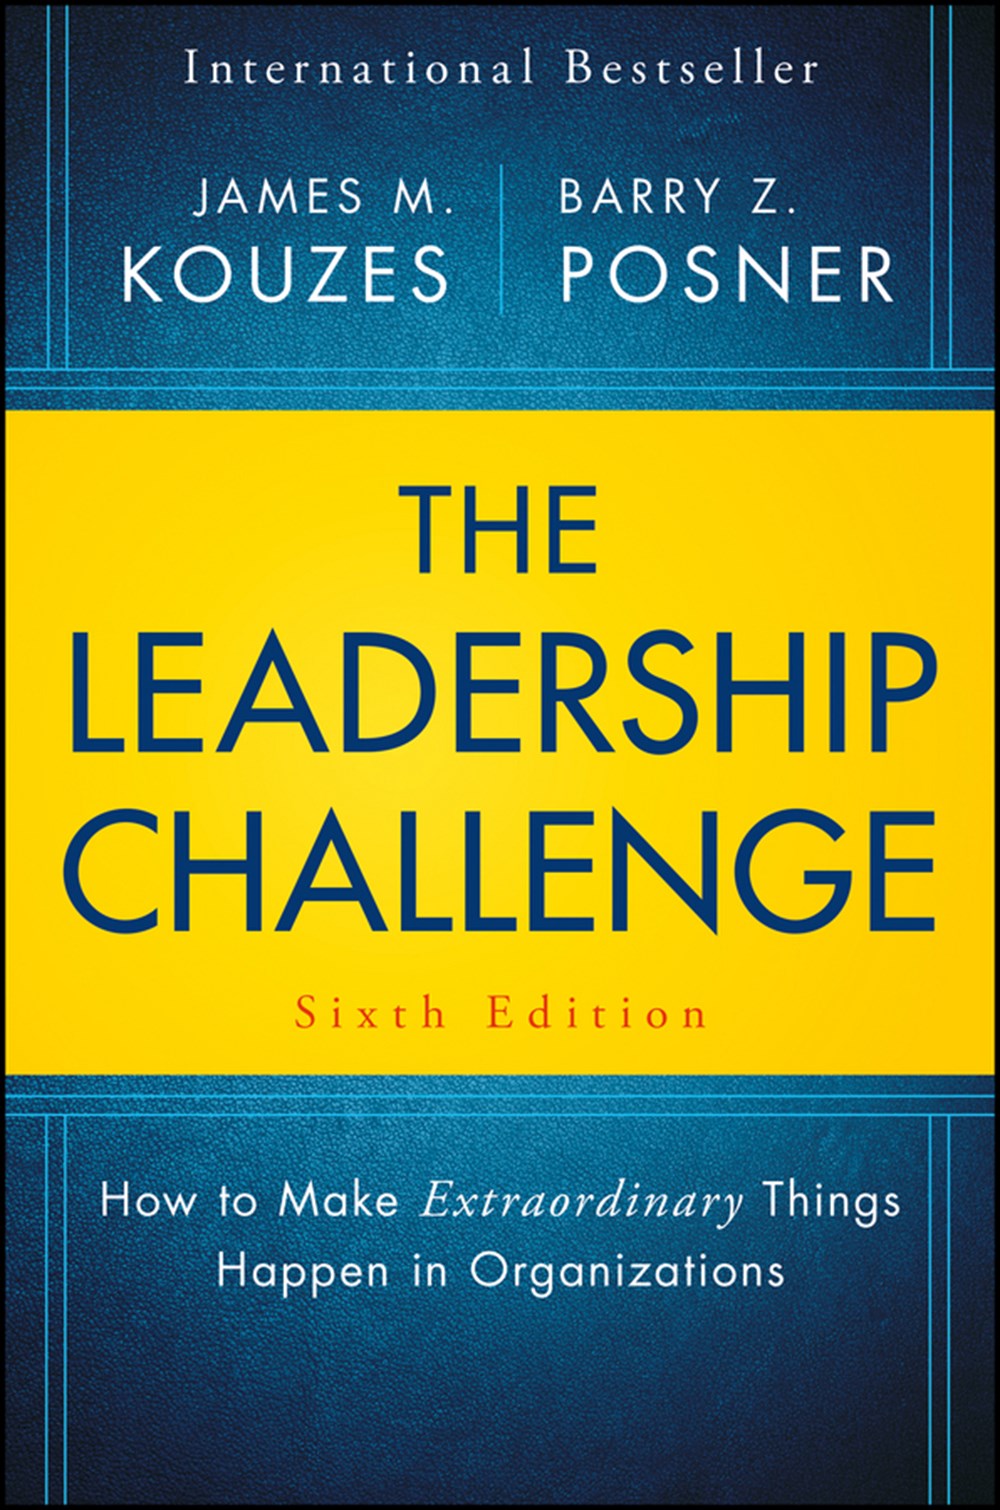 Leadership Challenge How to Make Extraordinary Things Happen in Organizations